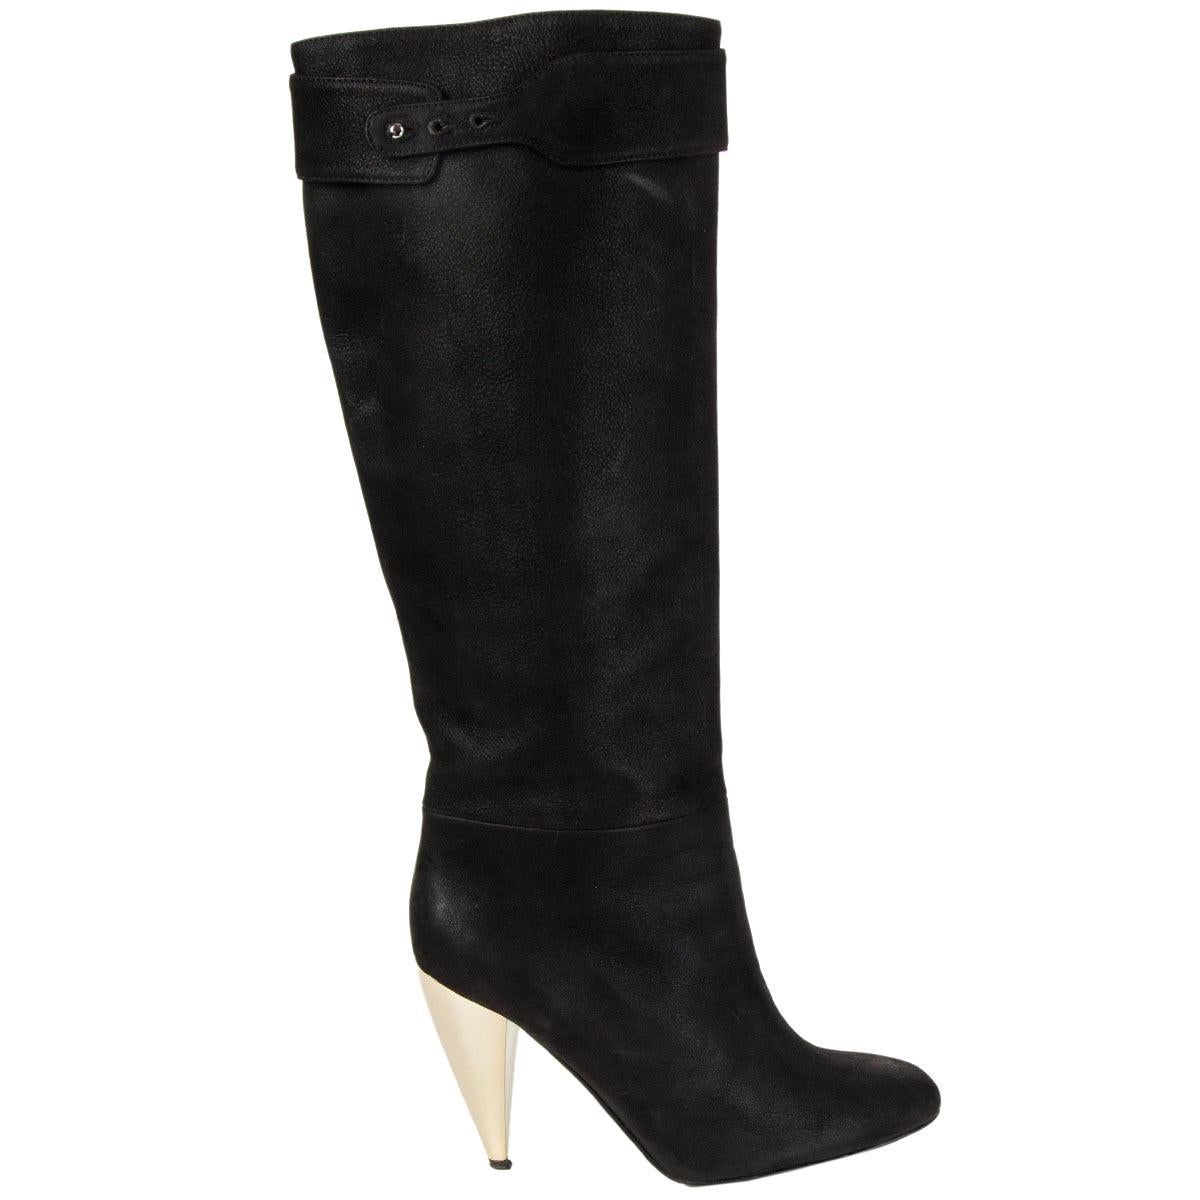 LANVIN black suede METALL HEEL Knee High Boots Shoes 37 For Sale